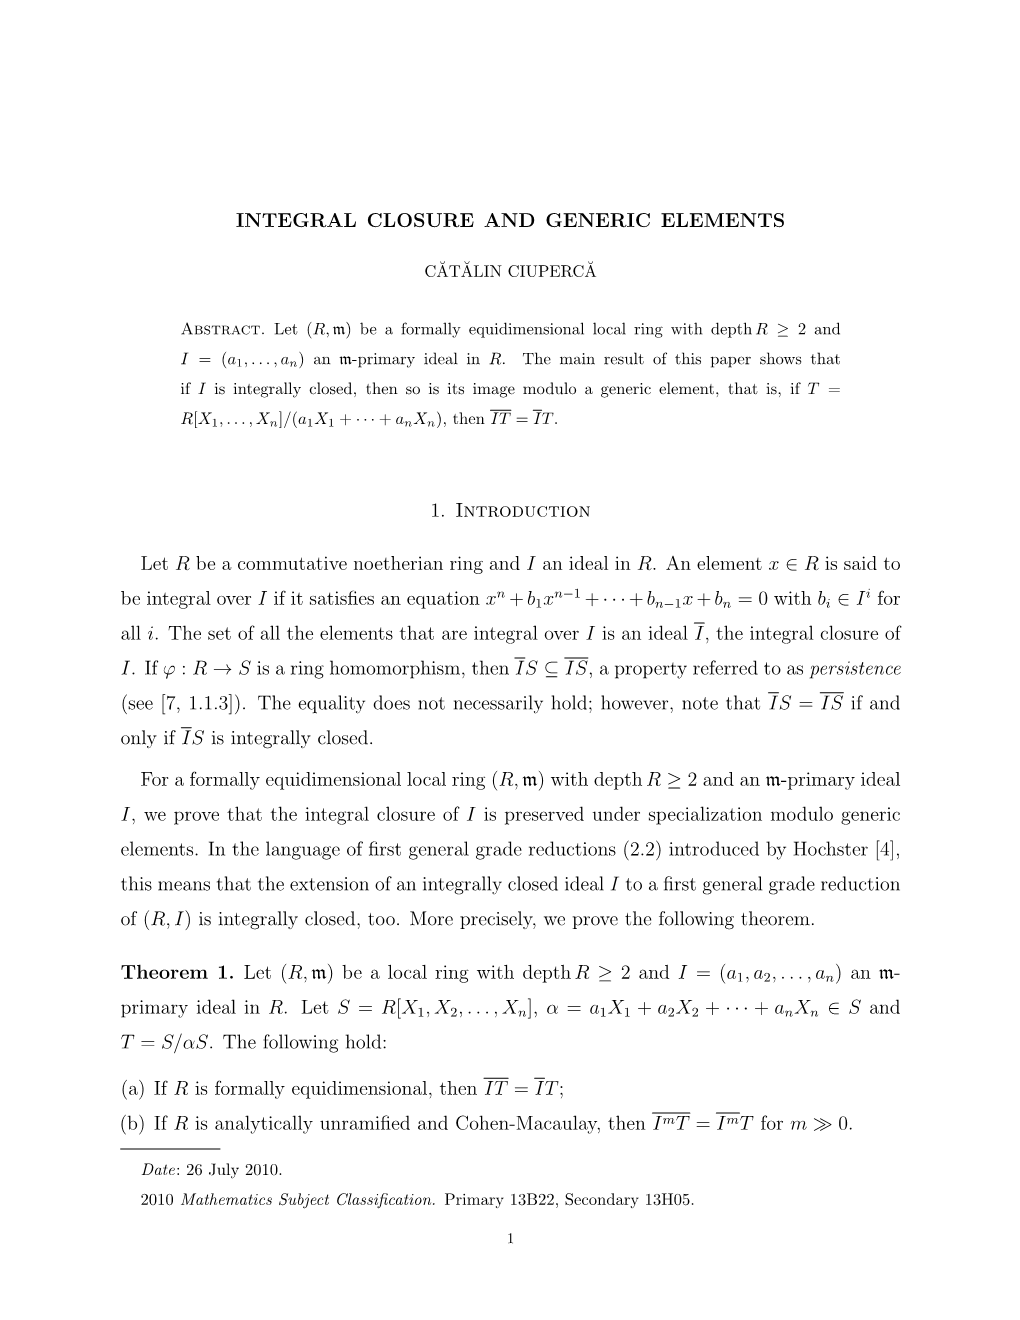 INTEGRAL CLOSURE and GENERIC ELEMENTS 1. Introduction Let R